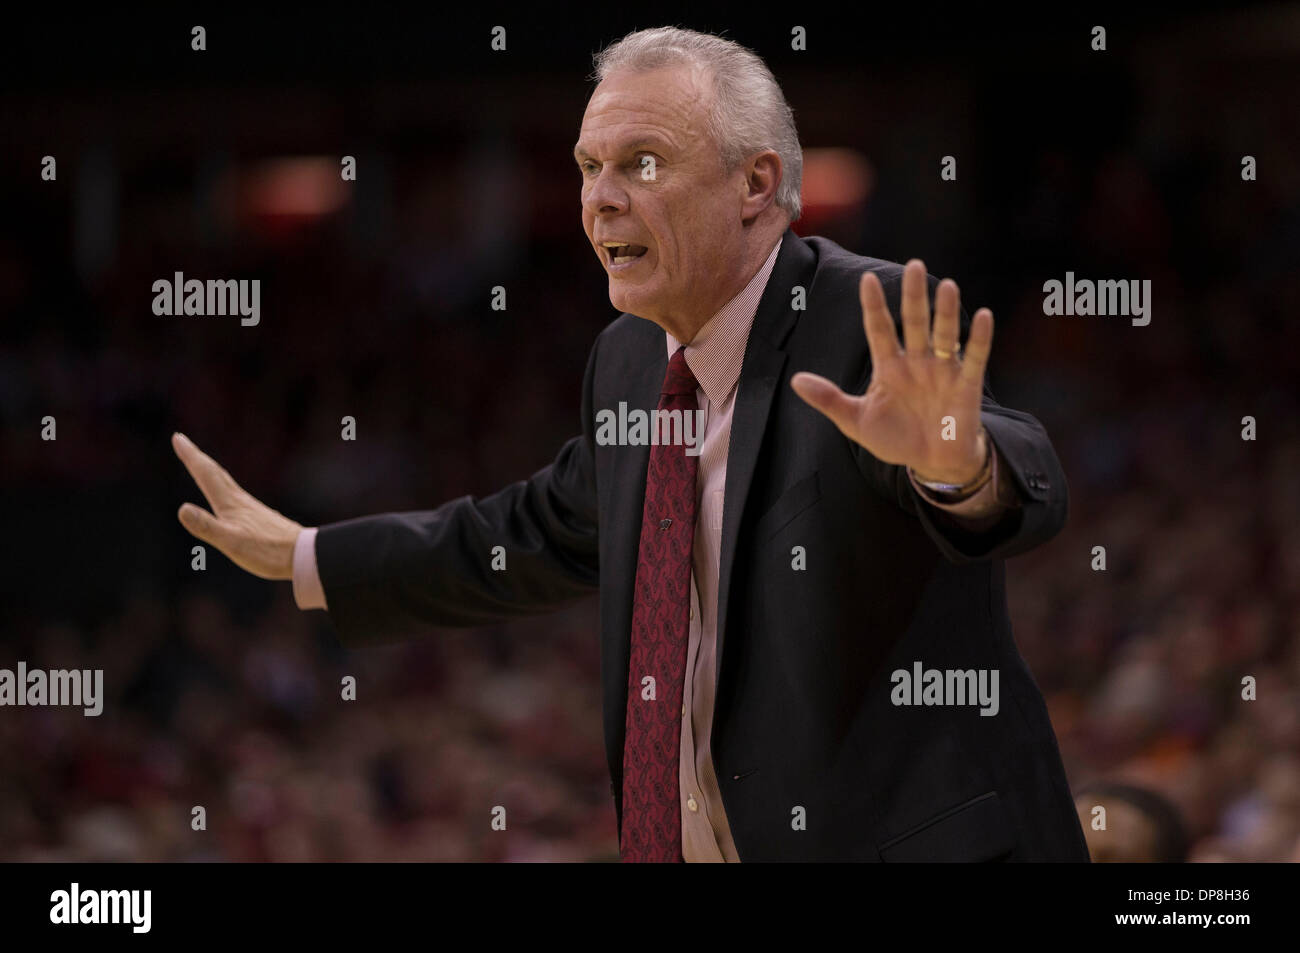 Madison, Wisconsin, USA. 8th Jan, 2014. January 8, 2014: Wisconsin Head Coach Bo Ryan reacts to a call during the NCAA Basketball game between the Illinois Fighting Illini and the Wisconsin Badgers at the Kohl Center in Madison, WI. With the win Wisconsin is now 16-0 and off to the best start in school history. The 4th ranked Badgers defeated the 23rd ranked Fighting Illini 95-70. John Fisher/CSM/Alamy Live News Stock Photo